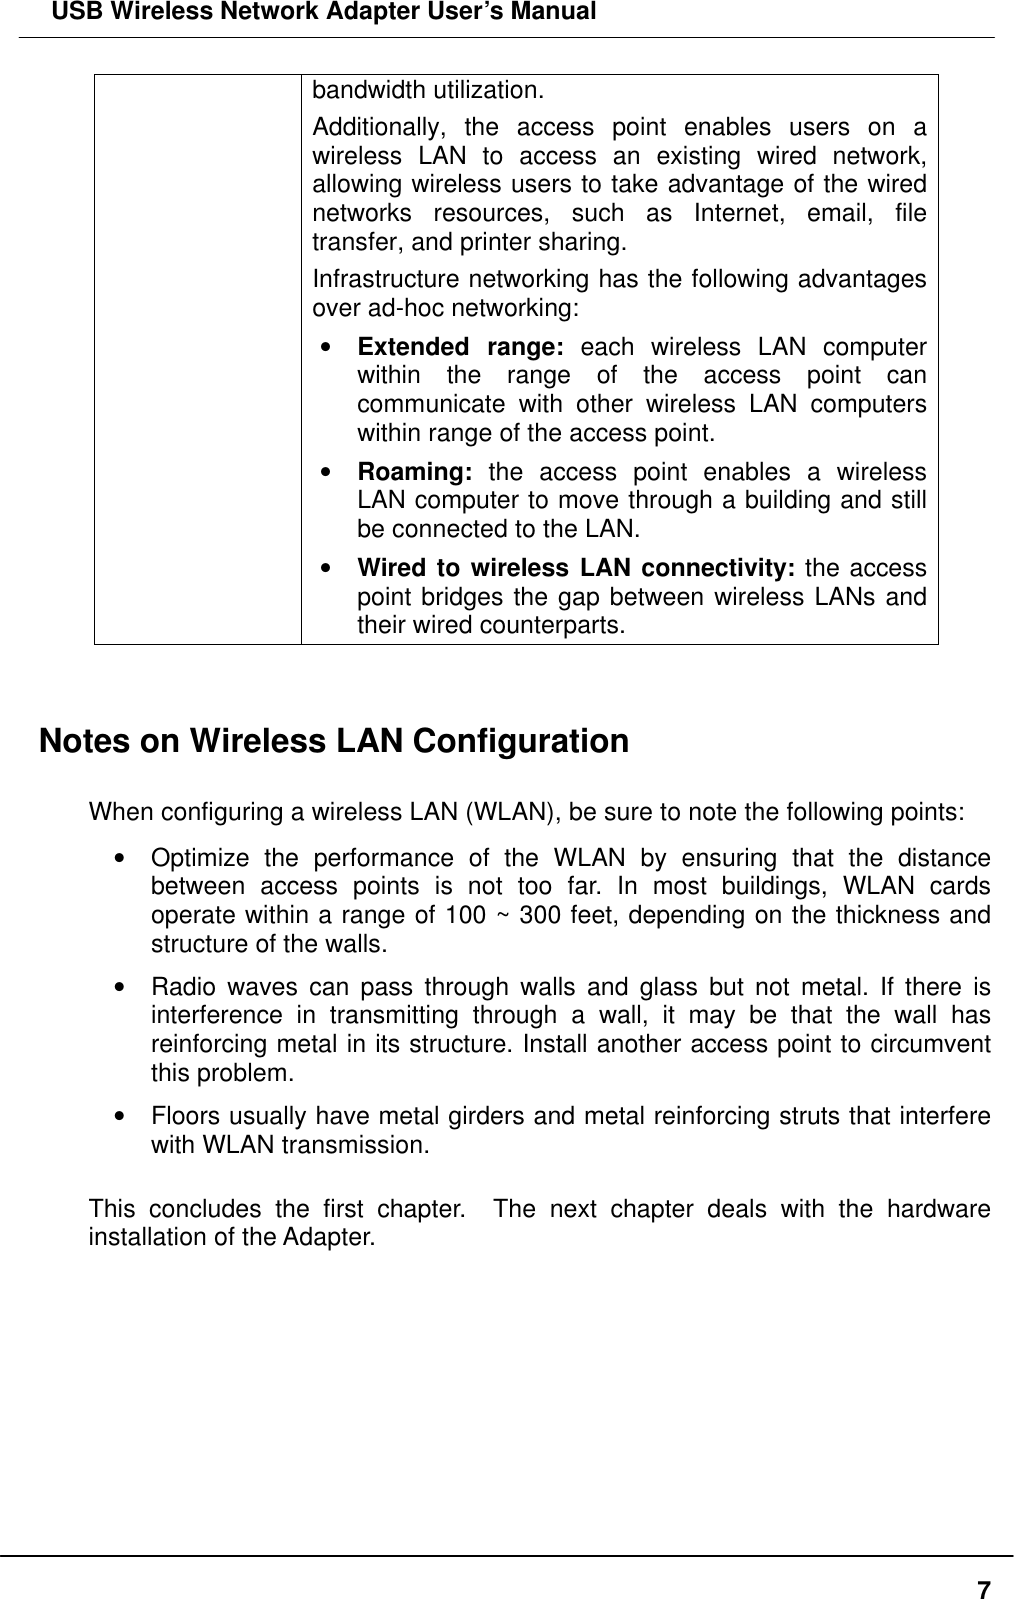  USB Wireless Network Adapter User’s Manual  7bandwidth utilization.   Additionally, the access point enables users on a wireless LAN to access an existing wired network, allowing wireless users to take advantage of the wired networks resources, such as Internet, email, file transfer, and printer sharing.   Infrastructure networking has the following advantages over ad-hoc networking: •  Extended range: each wireless LAN computer within the range of the access point can communicate with other wireless LAN computers within range of the access point. •  Roaming: the access point enables a wireless LAN computer to move through a building and still be connected to the LAN. •  Wired to wireless LAN connectivity: the access point bridges the gap between wireless LANs and their wired counterparts.   Notes on Wireless LAN Configuration  When configuring a wireless LAN (WLAN), be sure to note the following points: •  Optimize the performance of the WLAN by ensuring that the distance between access points is not too far. In most buildings, WLAN cards operate within a range of 100 ~ 300 feet, depending on the thickness and structure of the walls.   •  Radio waves can pass through walls and glass but not metal. If there is interference in transmitting through a wall, it may be that the wall has reinforcing metal in its structure. Install another access point to circumvent this problem. •  Floors usually have metal girders and metal reinforcing struts that interfere with WLAN transmission.  This concludes the first chapter.  The next chapter deals with the hardware installation of the Adapter.    